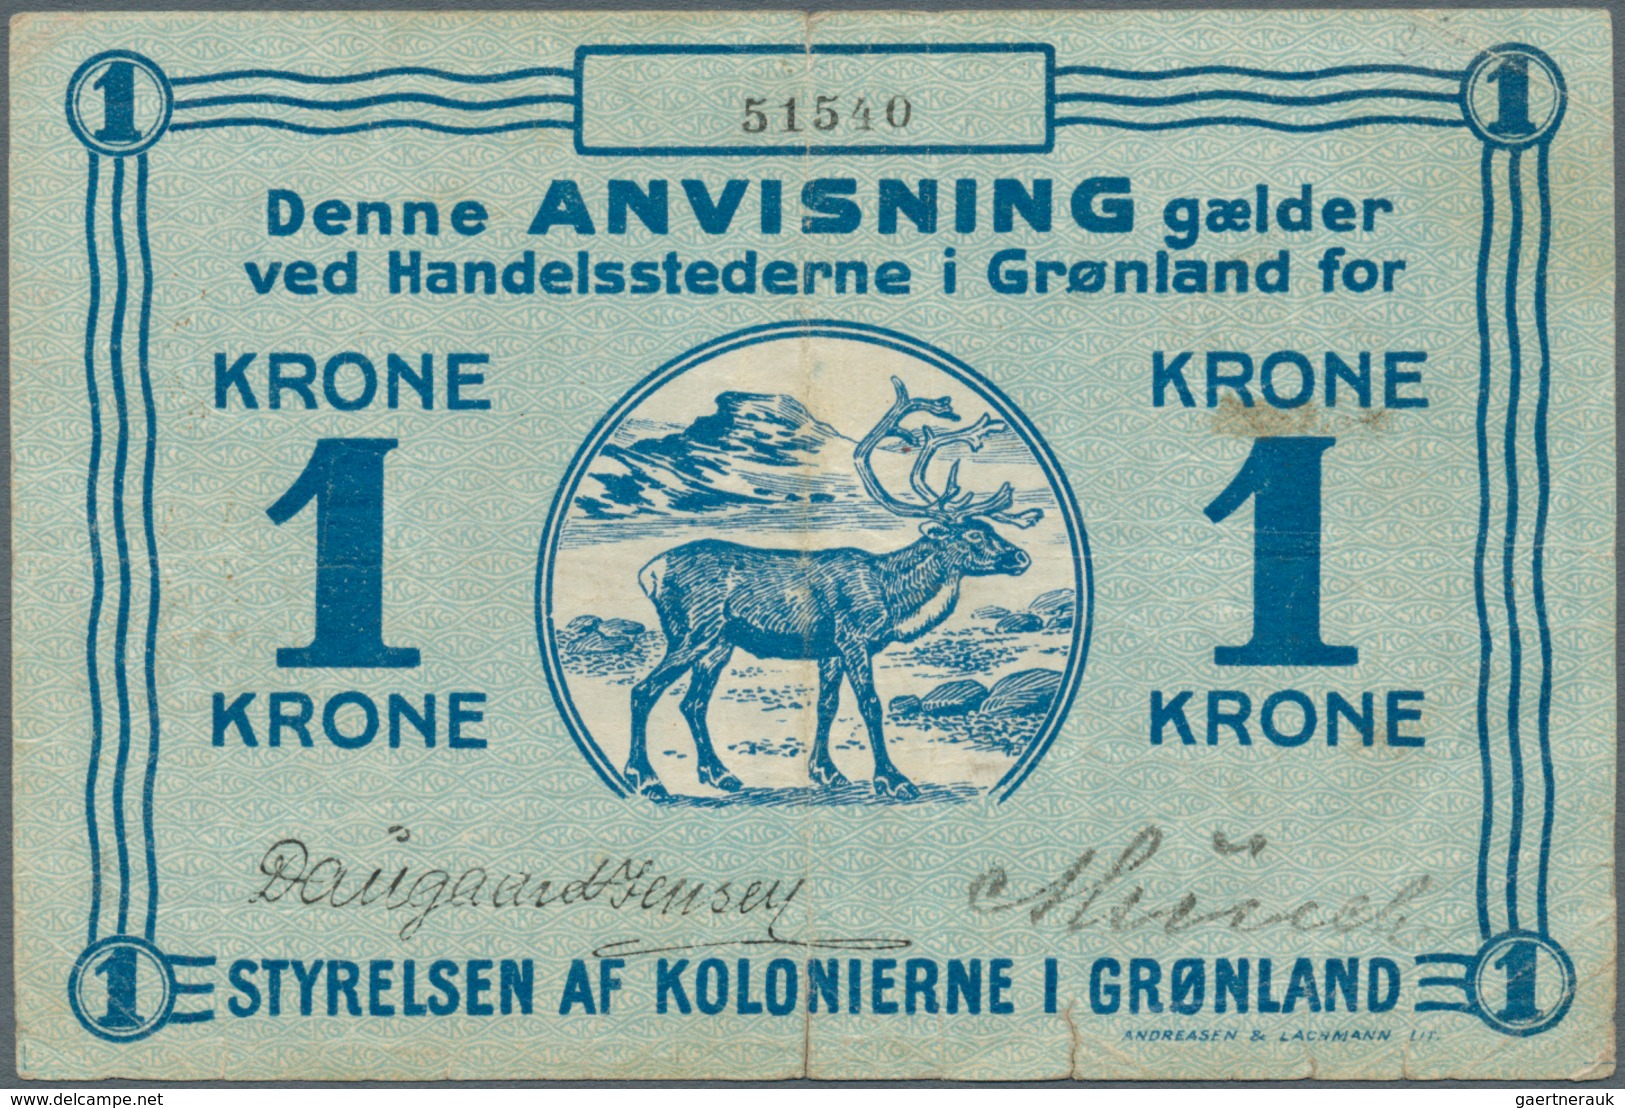 01651 Greenland / Grönland: 1 Krone ND(1913) P. 13, Used With Folds And Creases, Border Tears, No Repairs, - Groenlandia